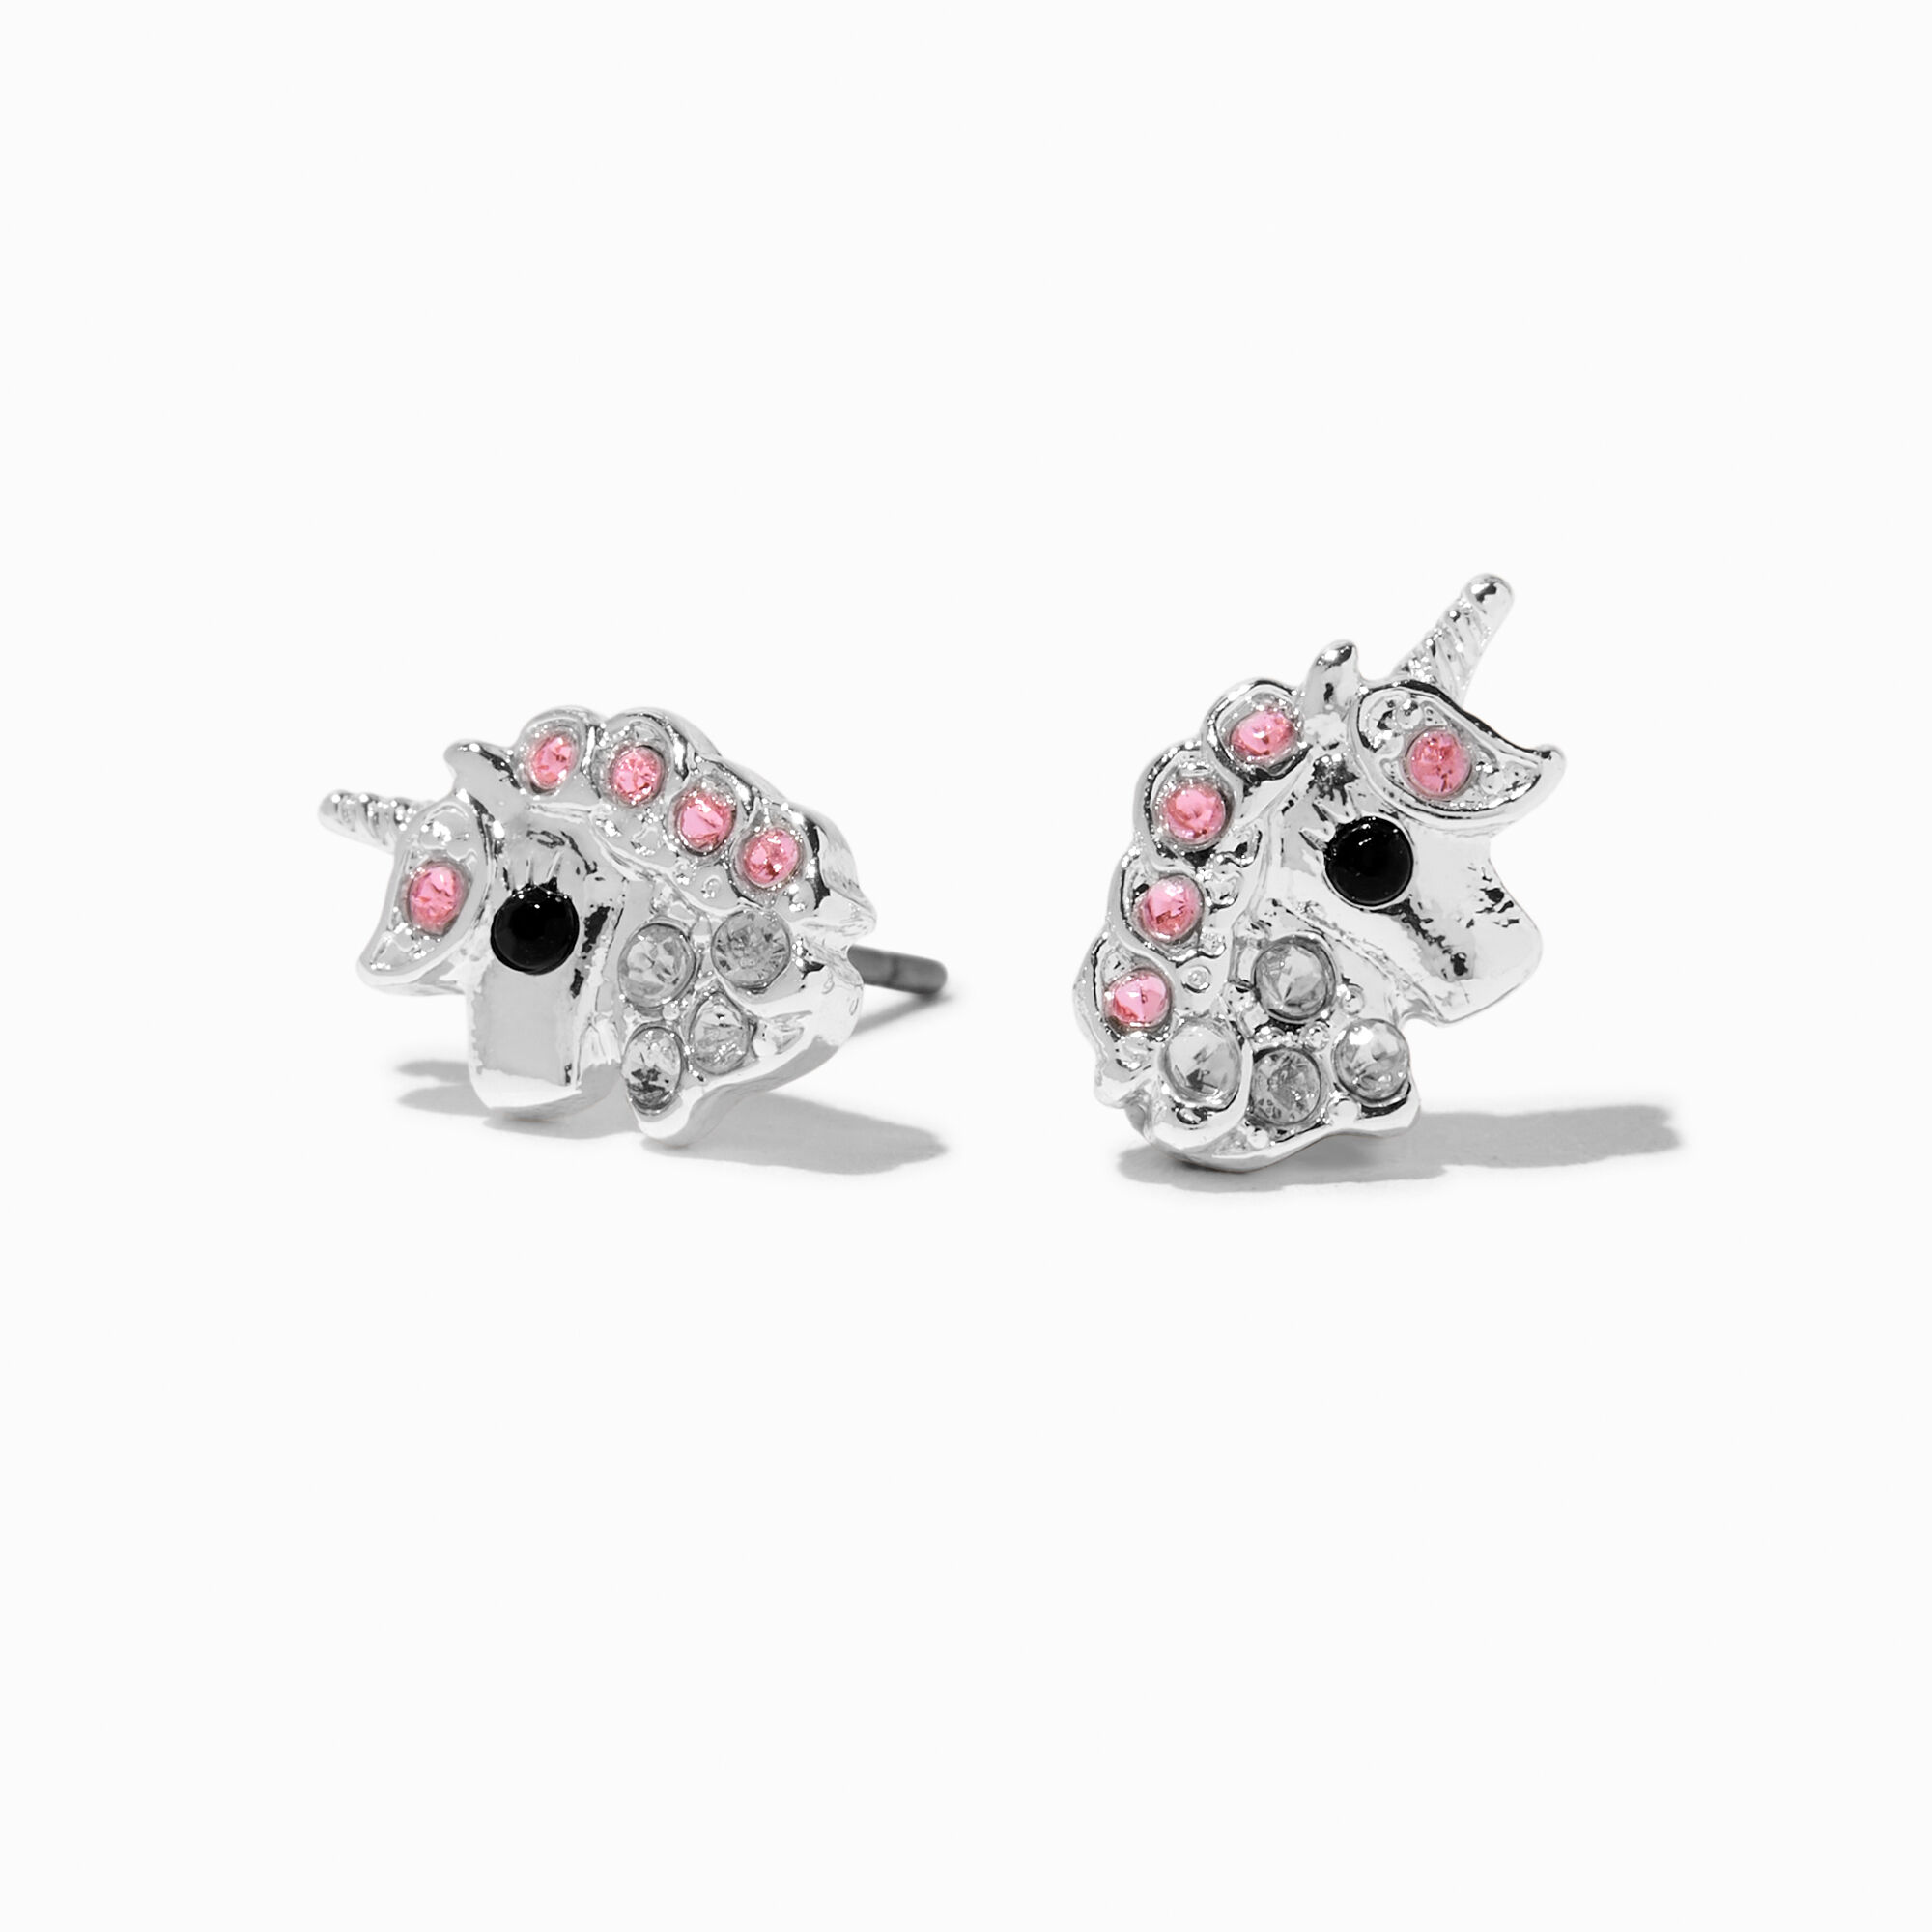 View Claires SilverTone Crystal Unicorn Stud Earrings Pink information